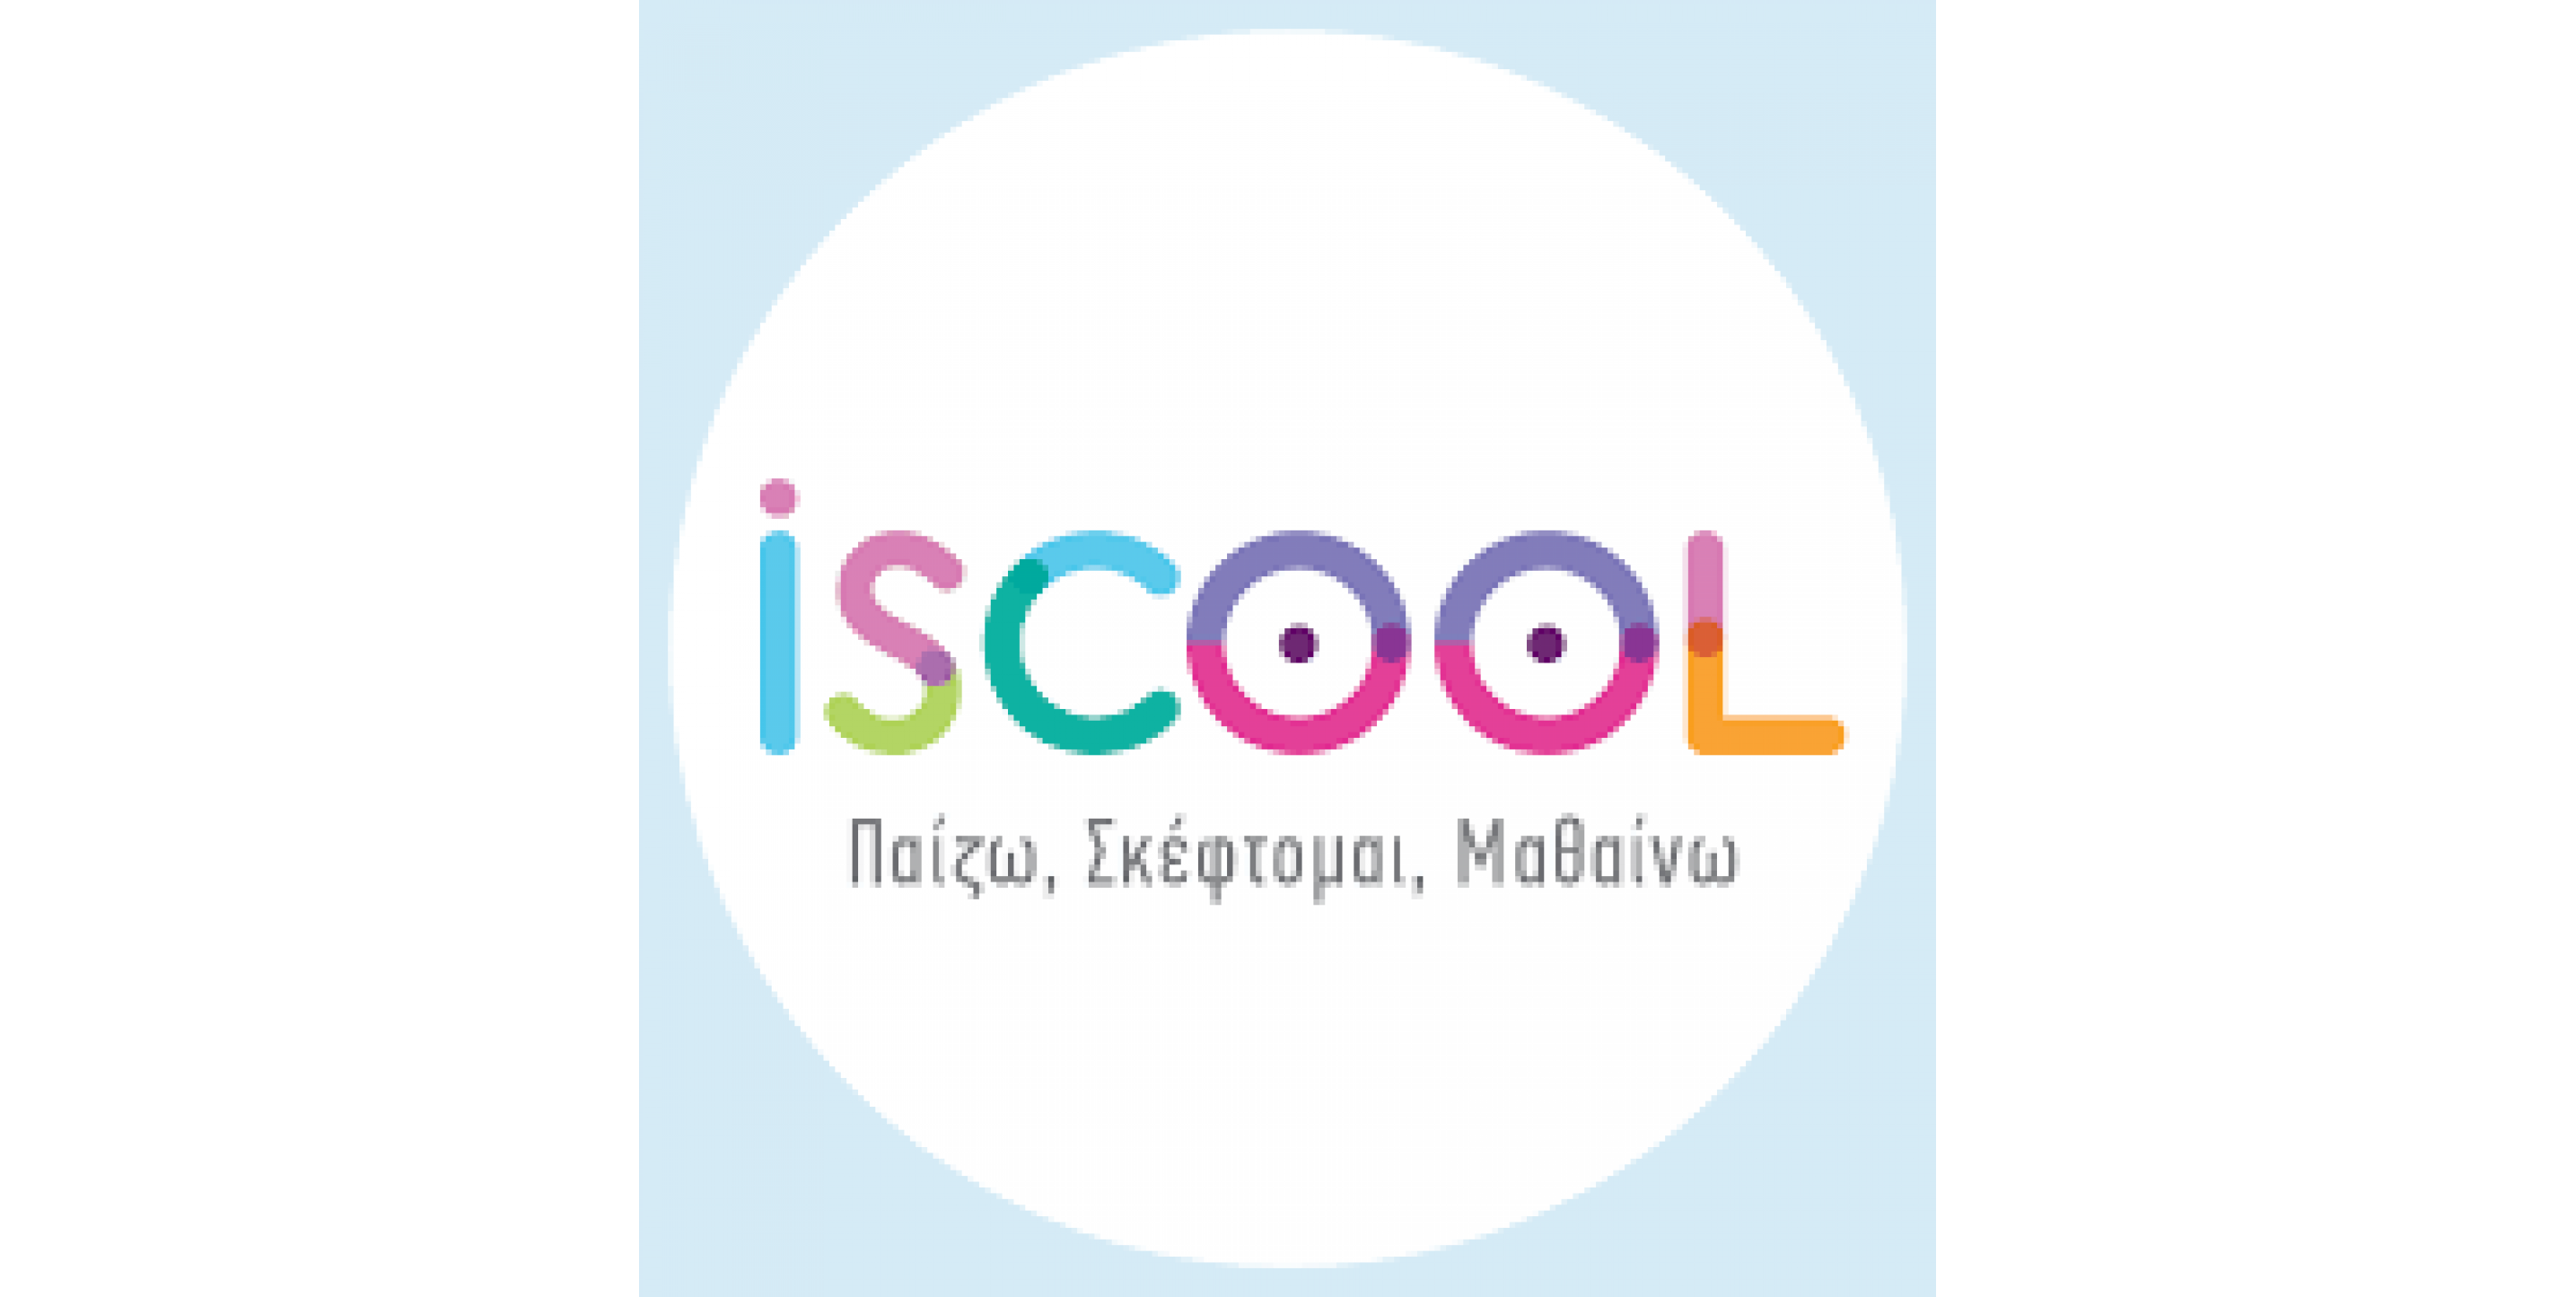 iscool